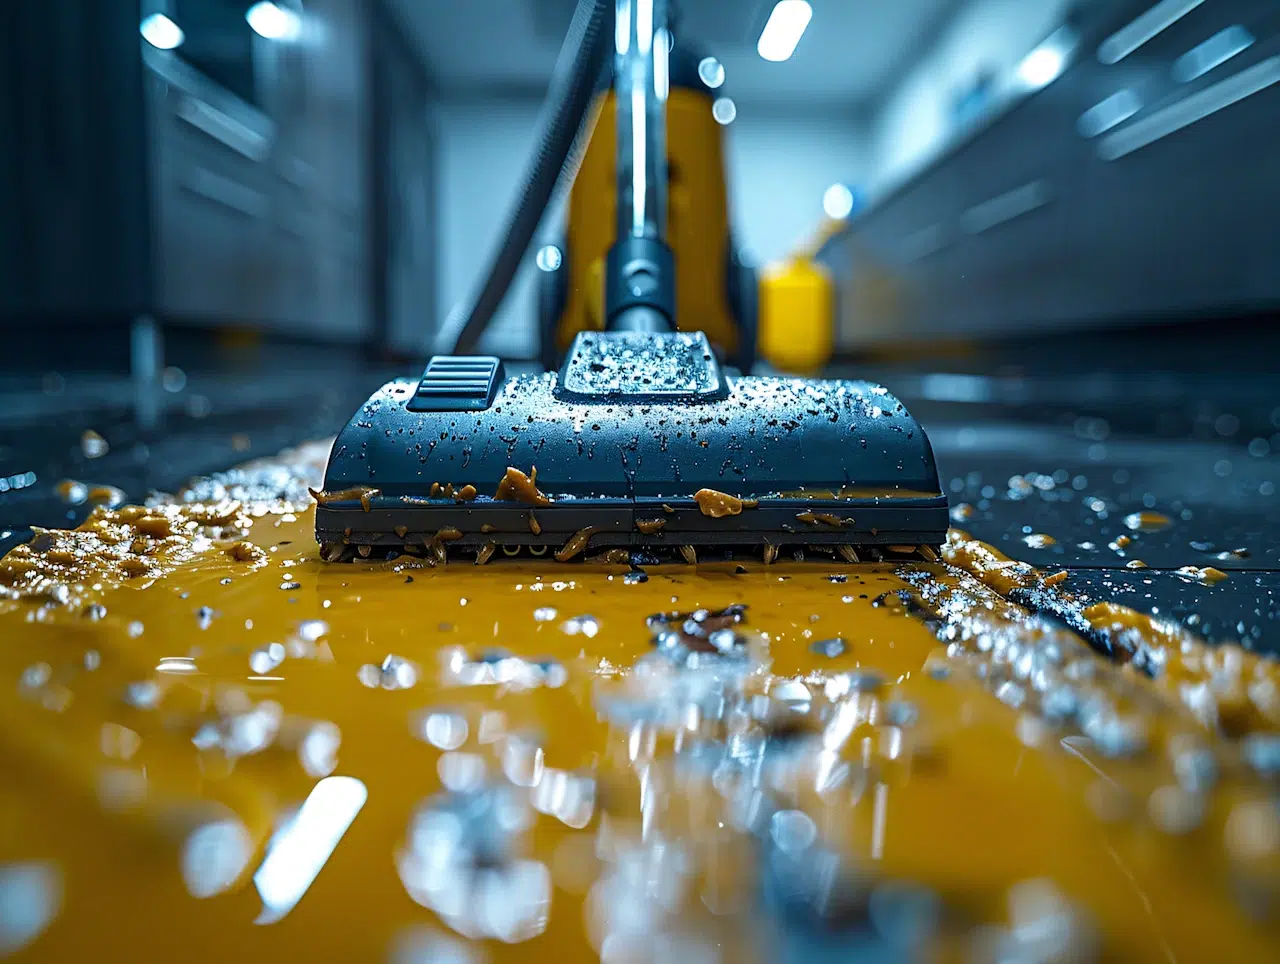 A close-up of a vacuum cleaner head wet and covered in debris, vacuuming a shiny yellow floor scattered with dirt and water droplets in a dimly lit environment.